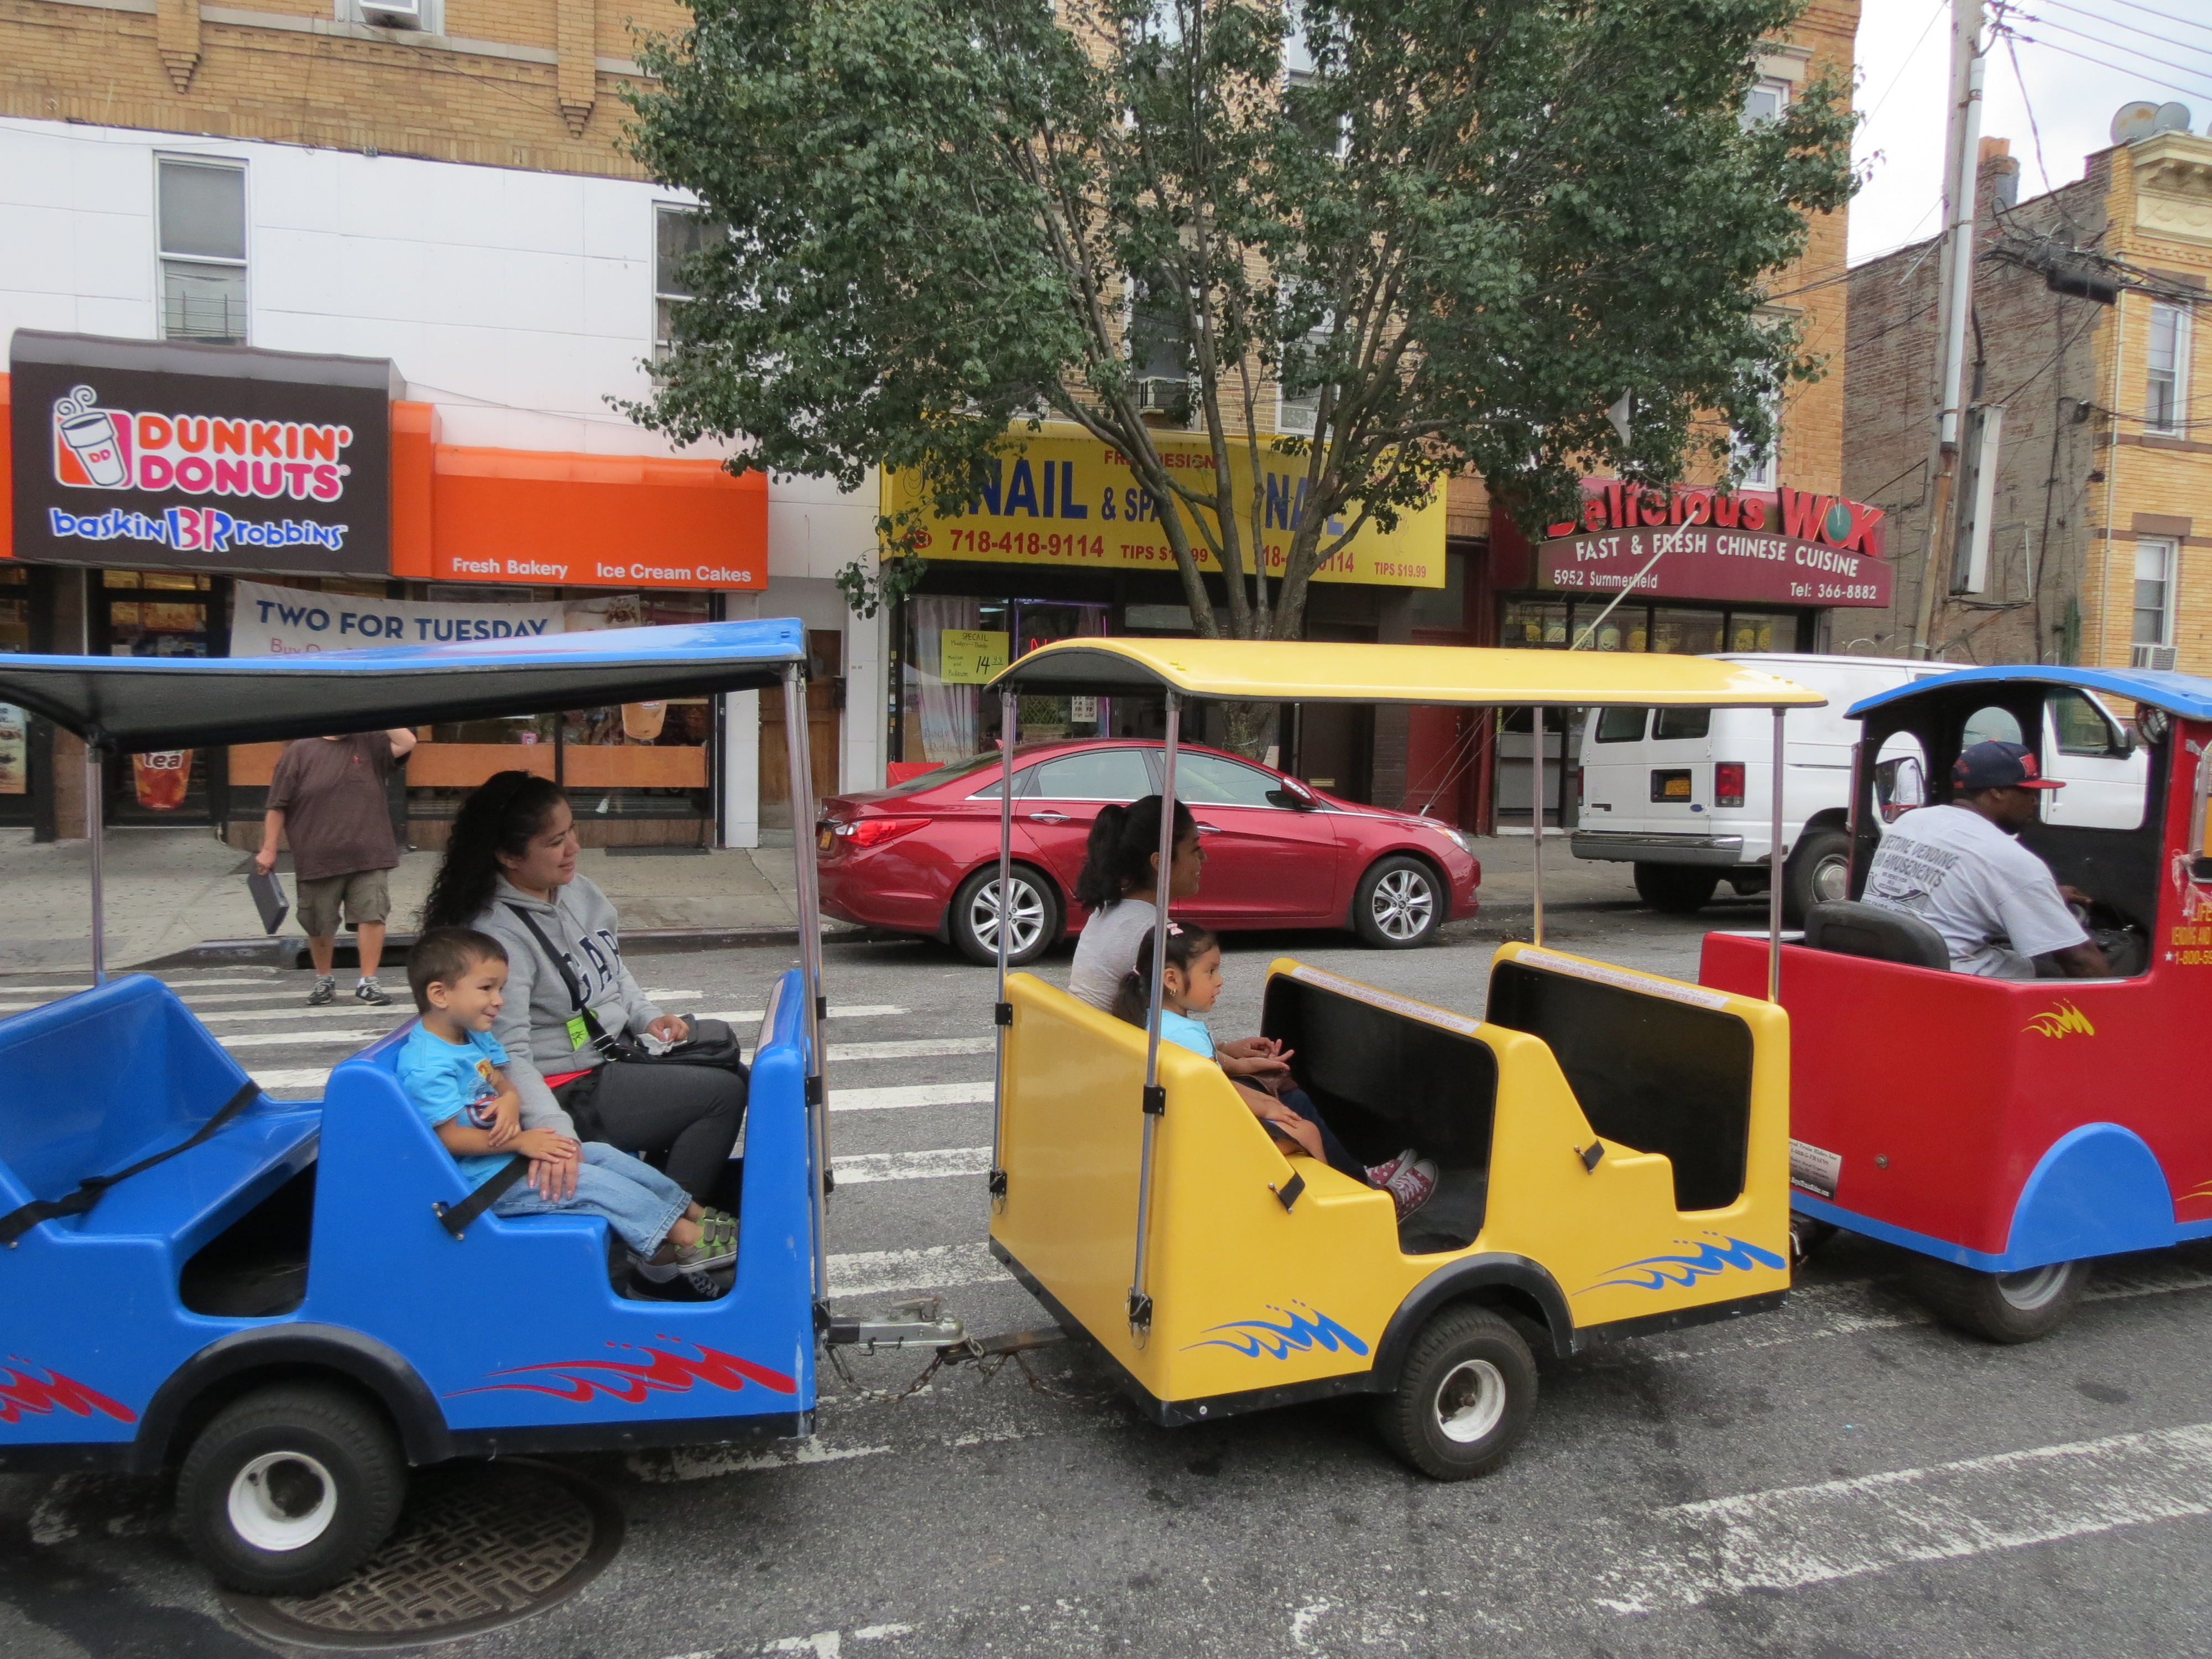 A colorful train took children on a ride around Myrtle Avenue.